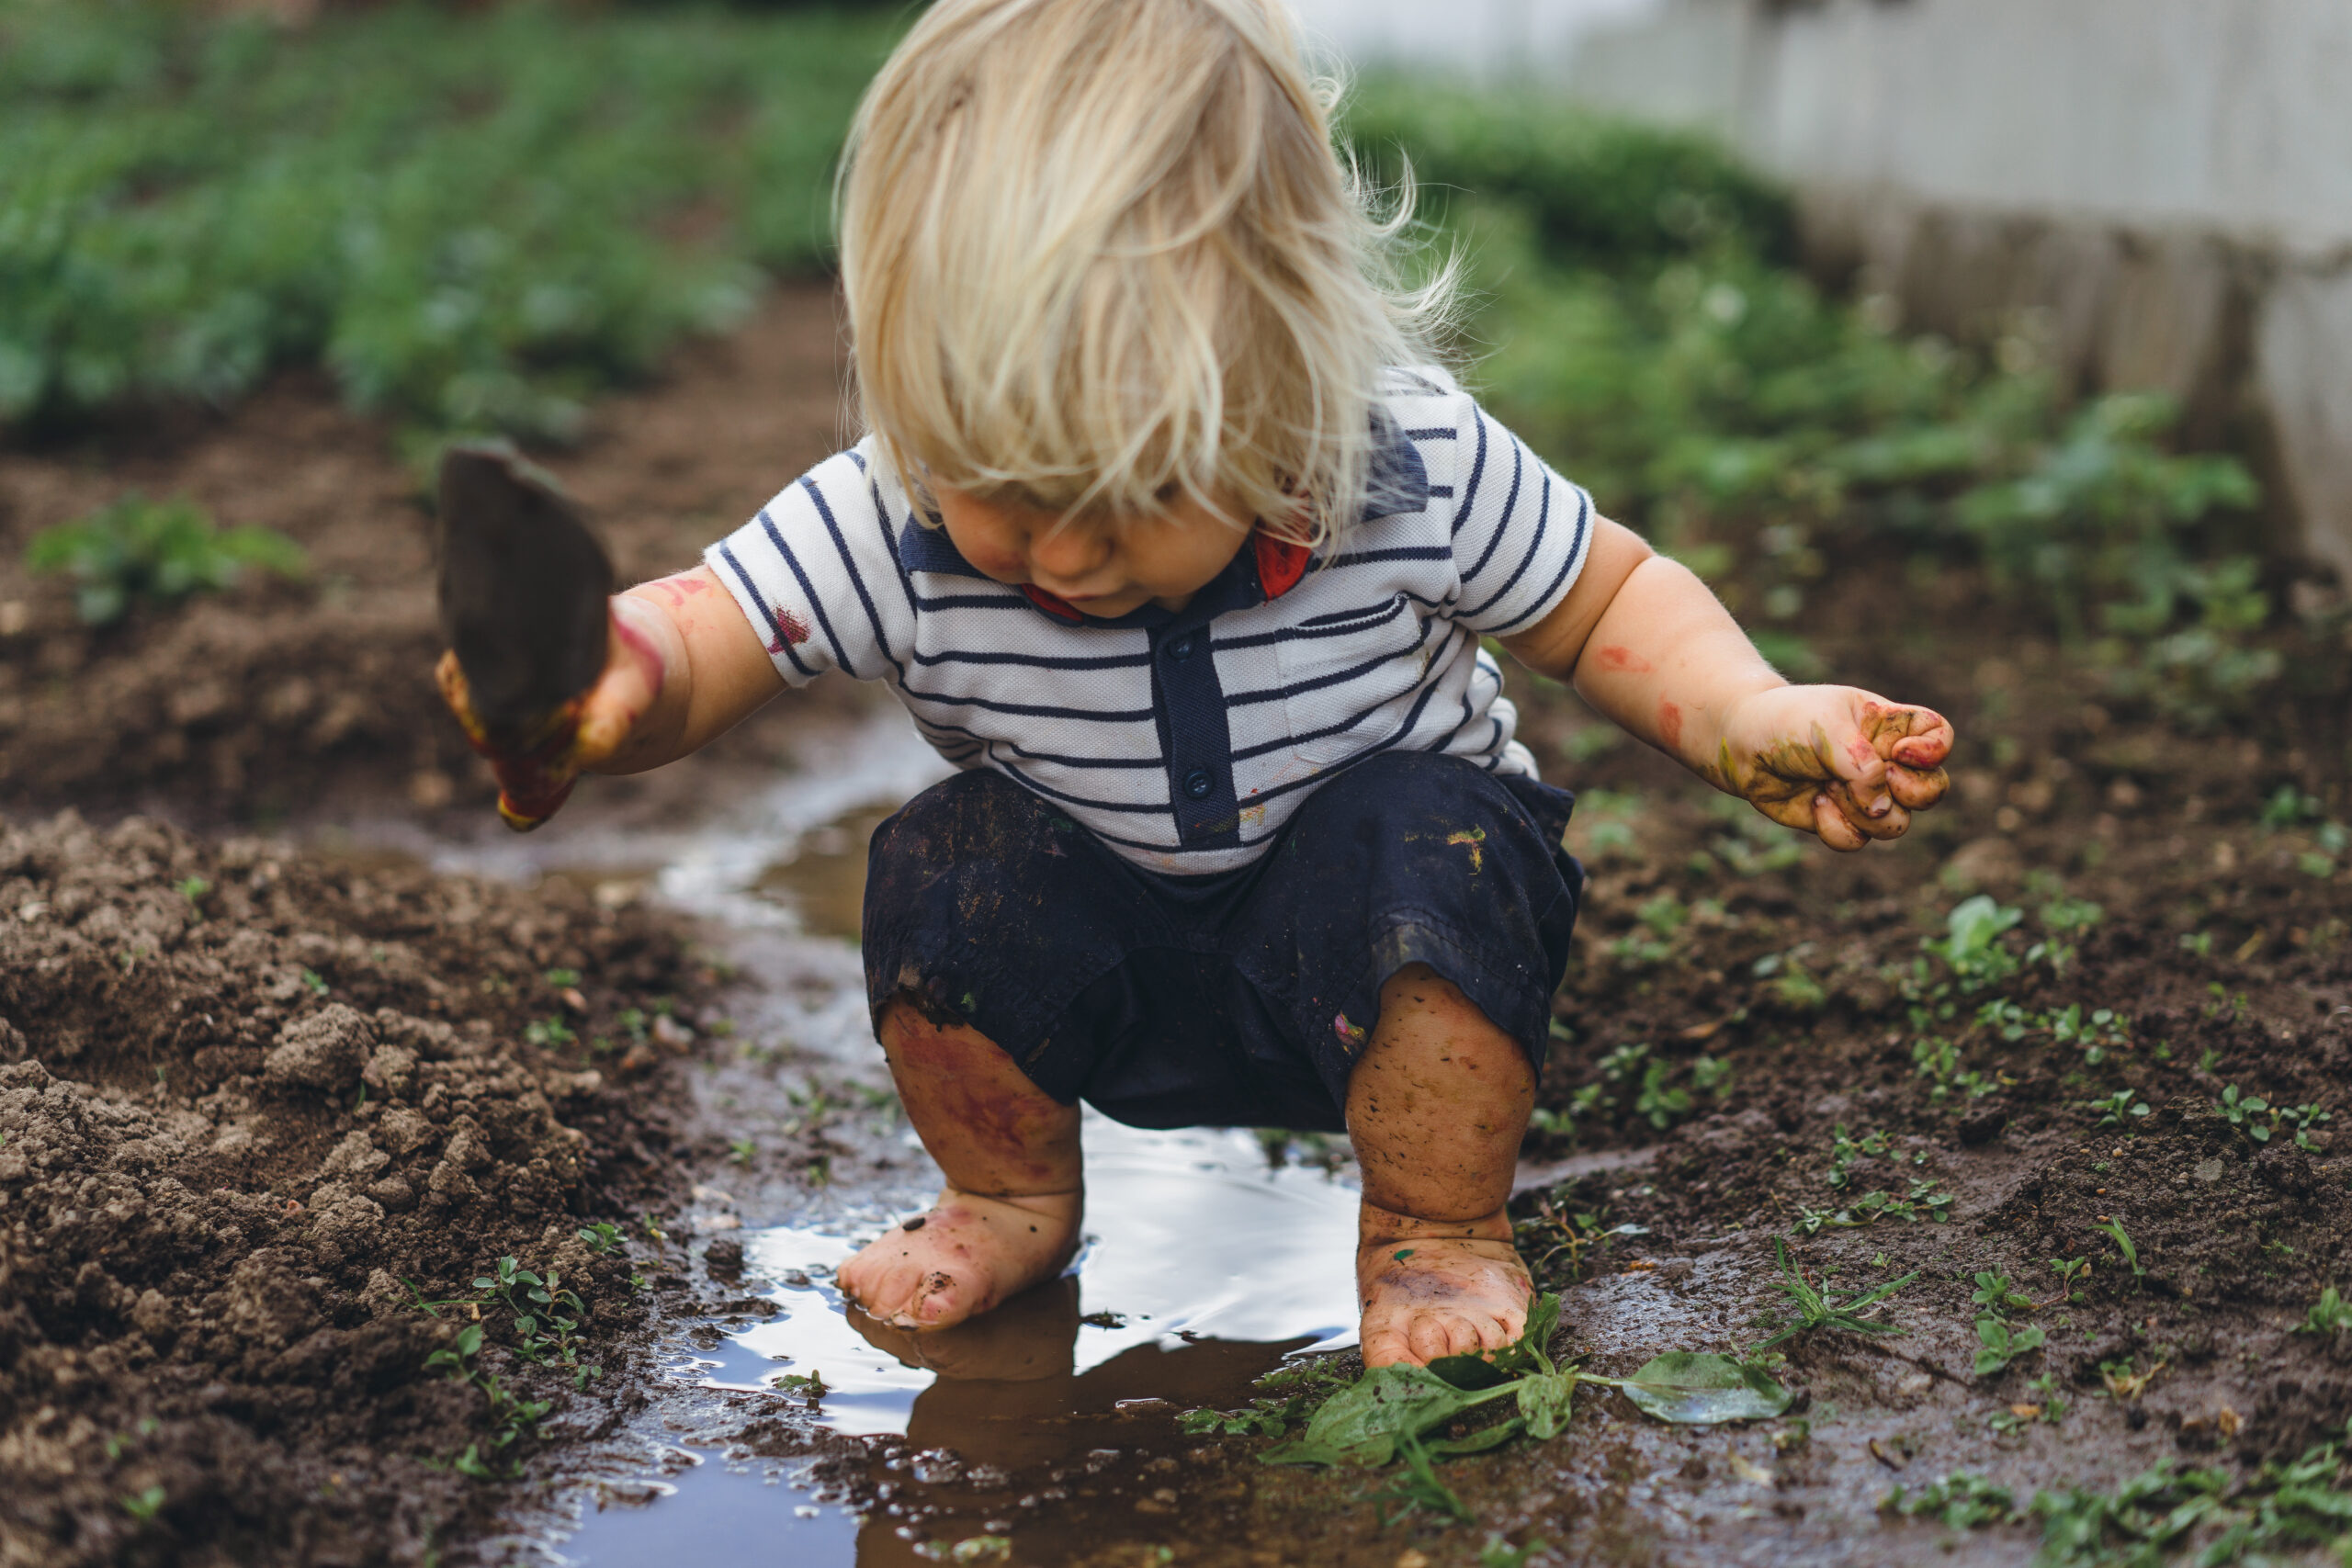 A toddler with blonde hair, wearing a striped shirt and navy shorts, plays in a muddy puddle in a garden, holding a trowel and covered in mud splatters.